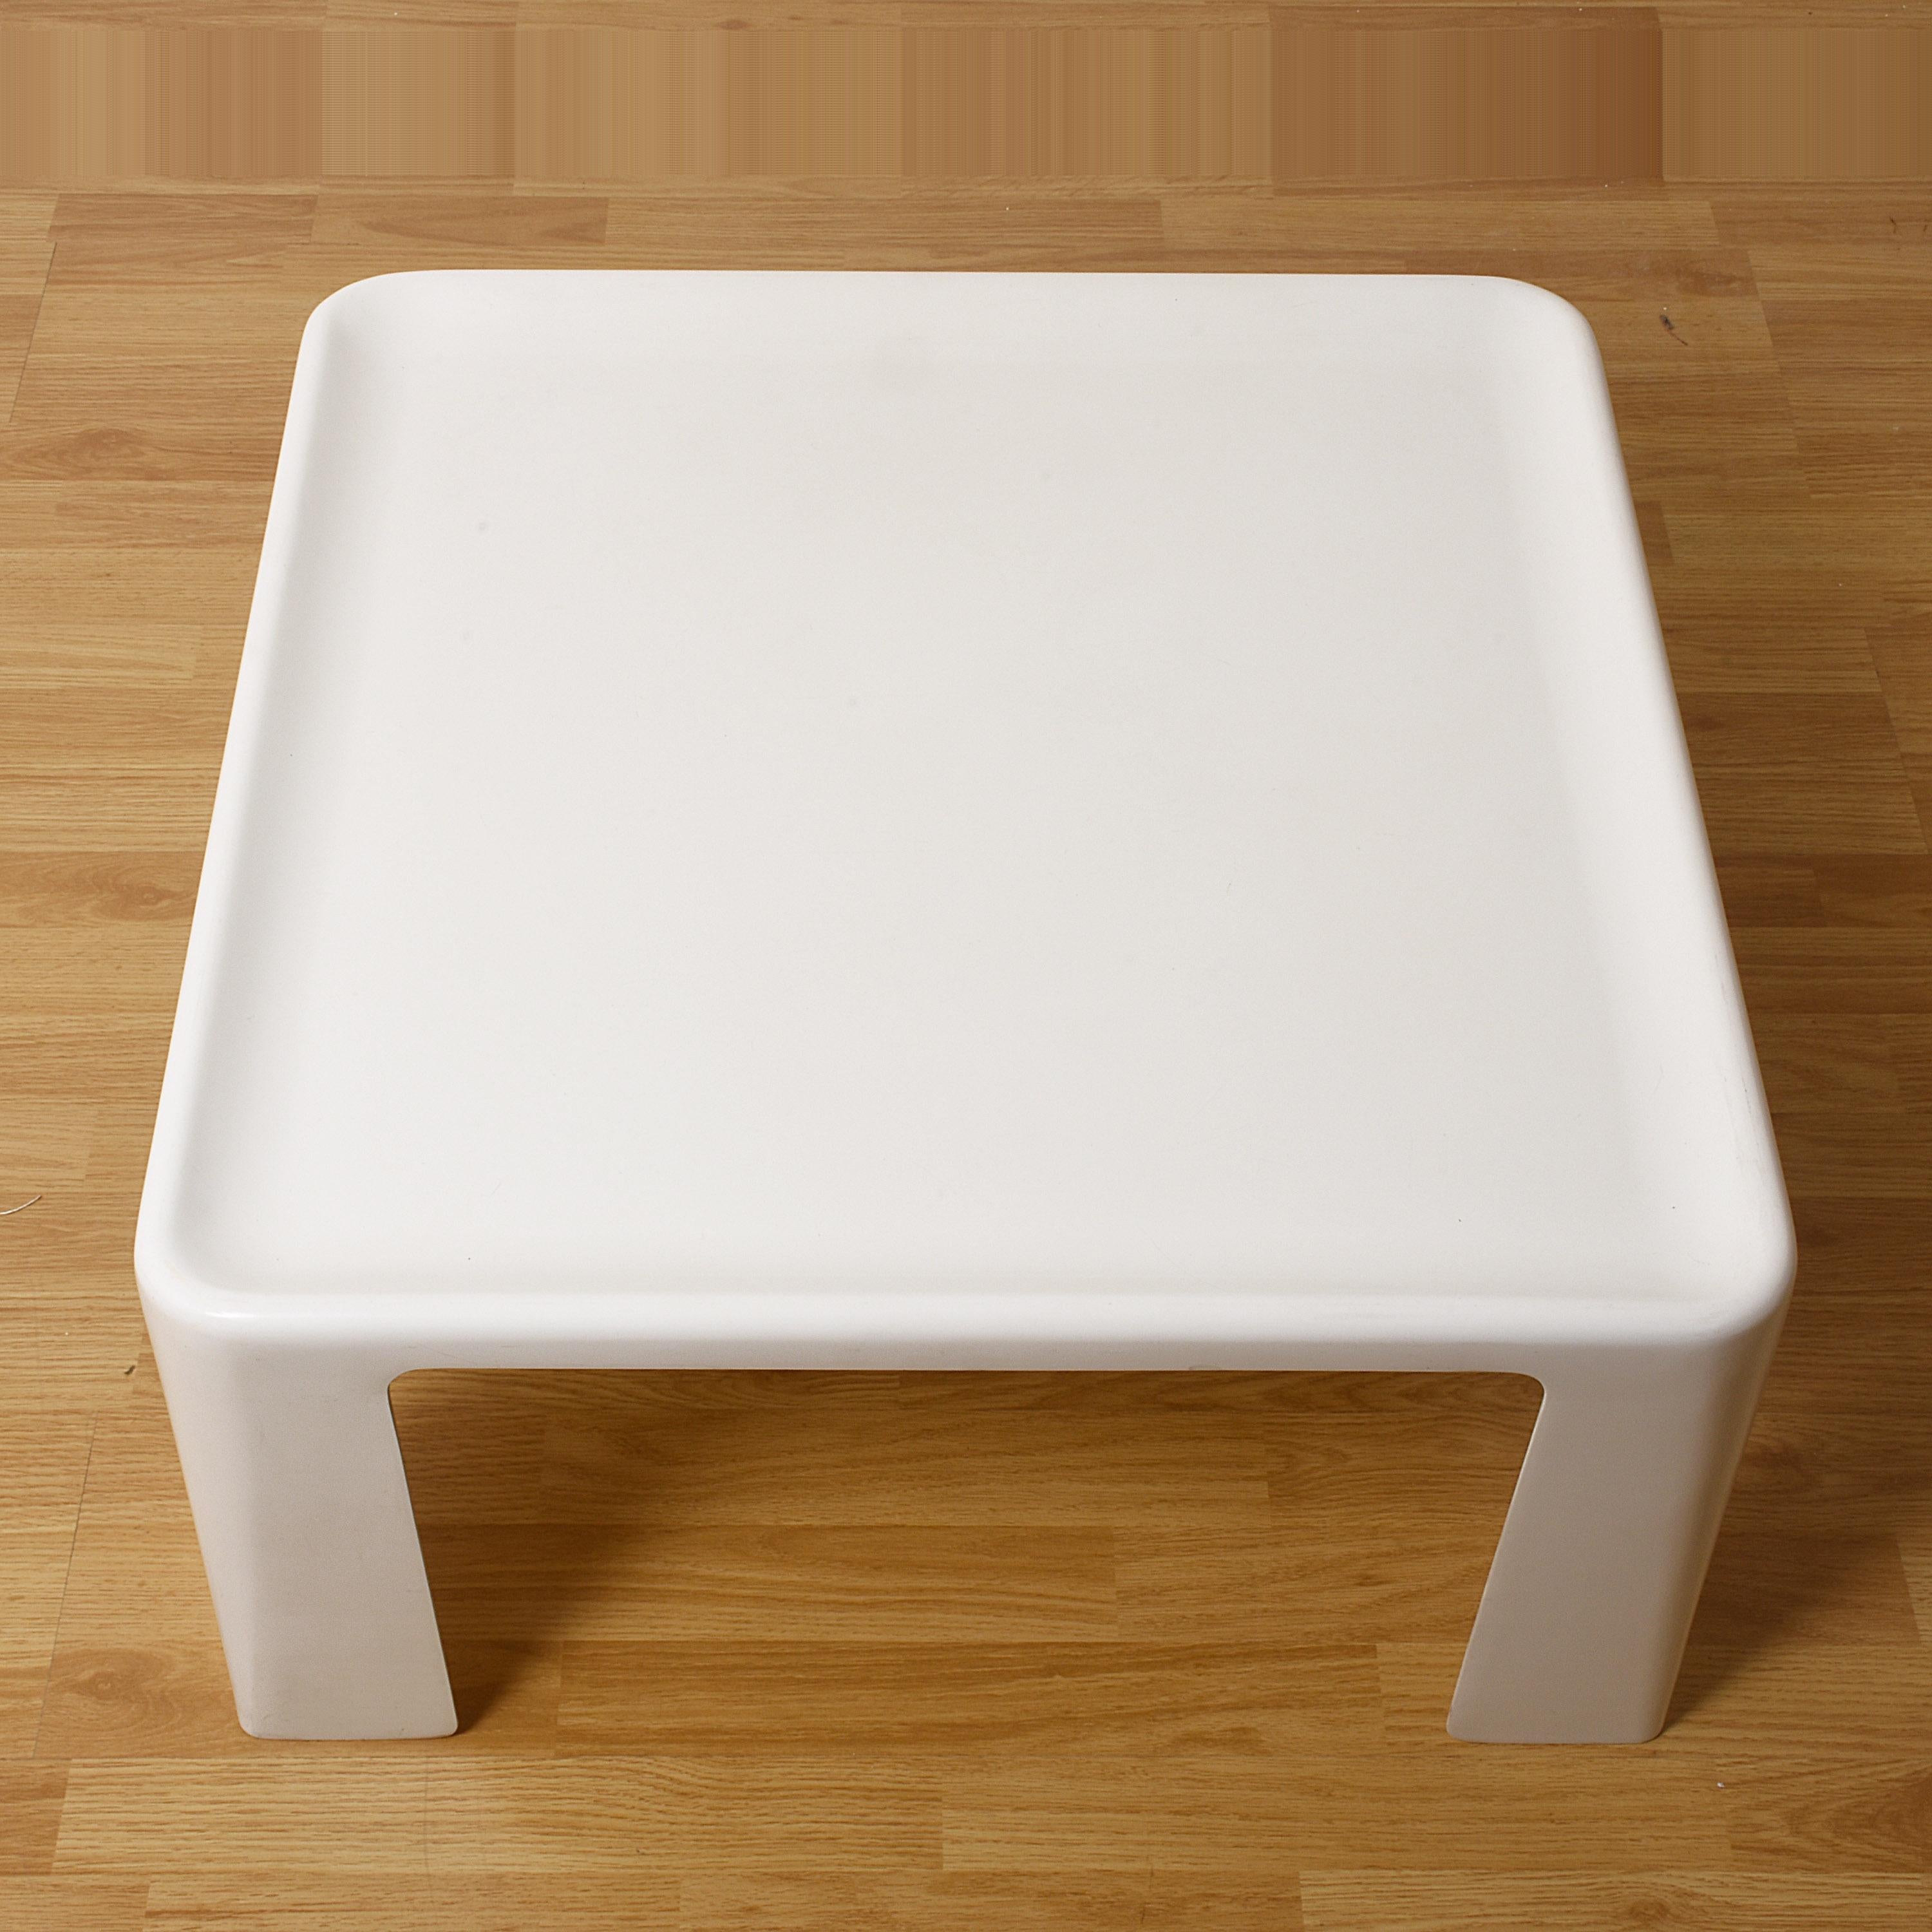 This side table or coffee table is made of fiberglass (Fiberlite) in white. It is square with an indented tabletop. It was designed by Mario Bellini for C&B Italia in the 1960s.